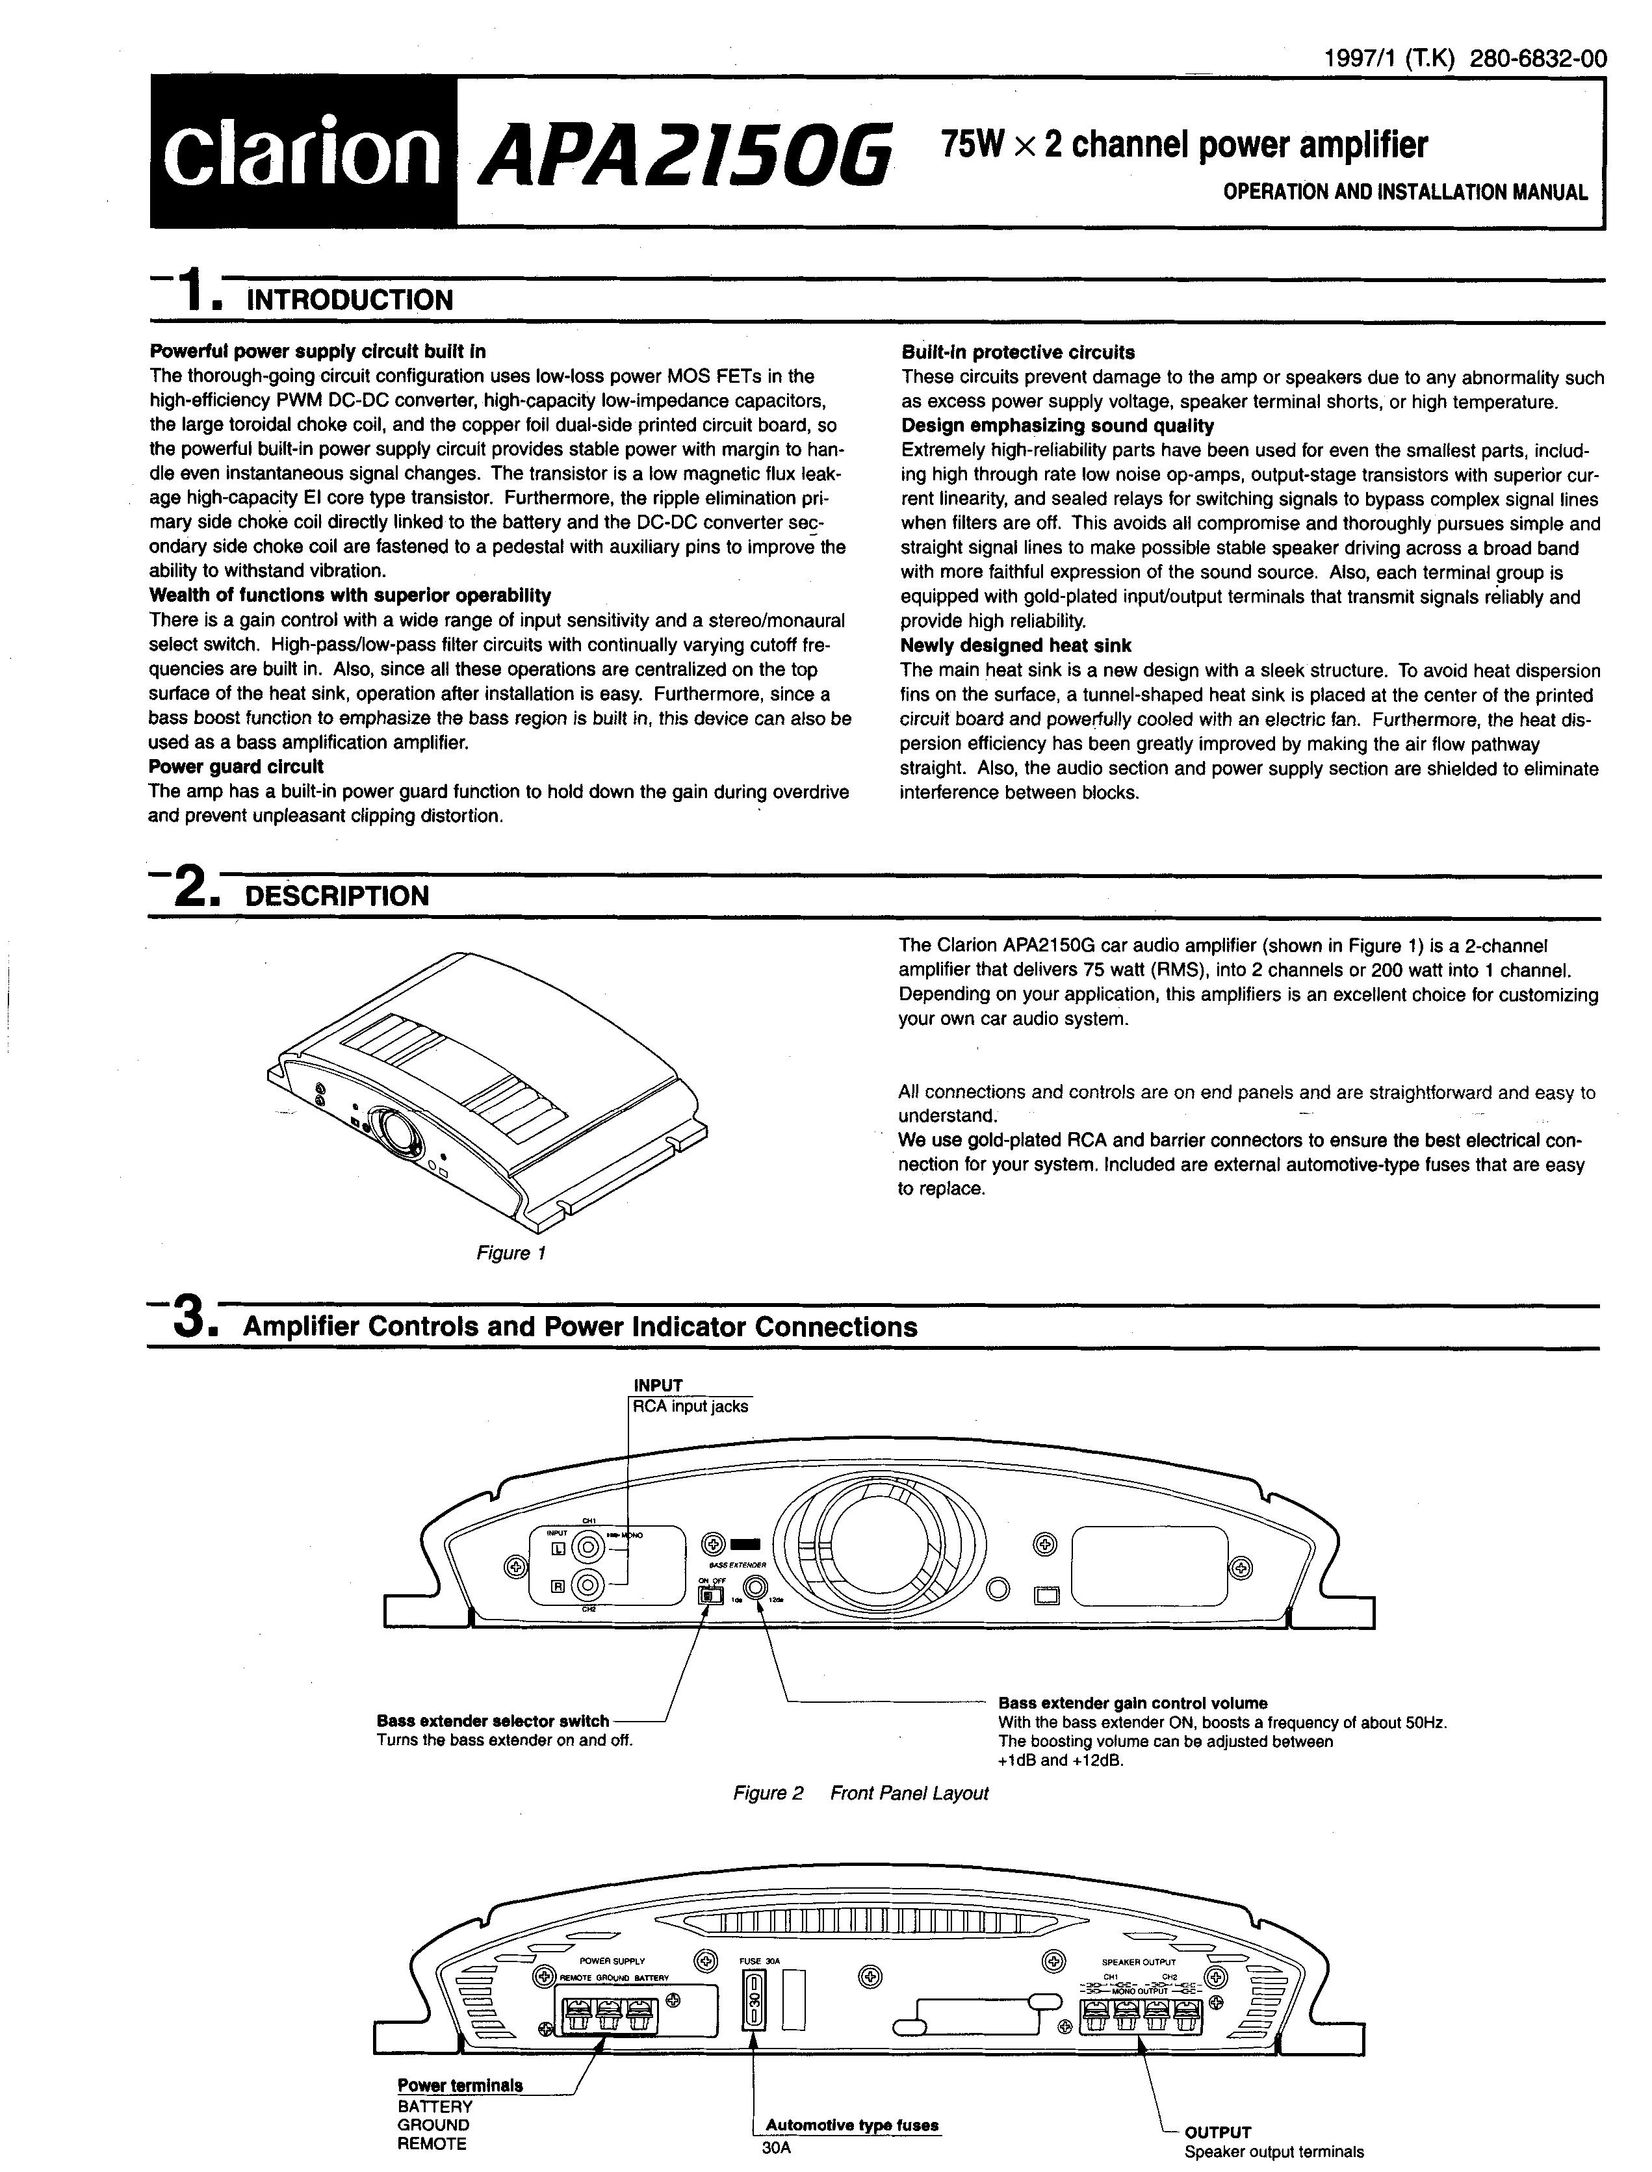 Clarion APA2150G Stereo Amplifier User Manual